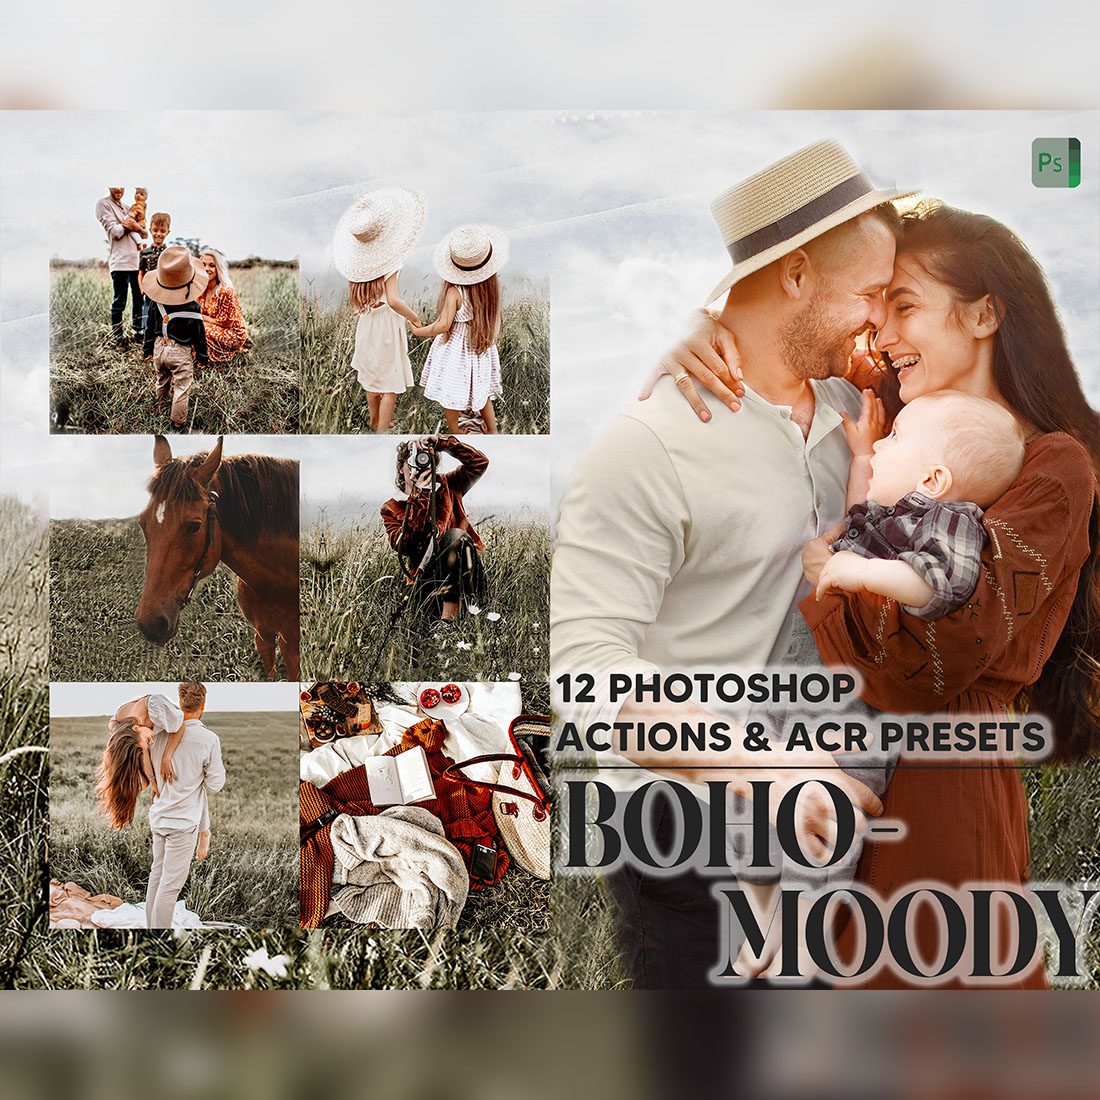 12 Photoshop Actions, Boho-Moody Ps Action, Rustic ACR Preset, Bohemian Ps Filter, Atn Portrait And Lifestyle Theme Instagram, Blogger cover image.